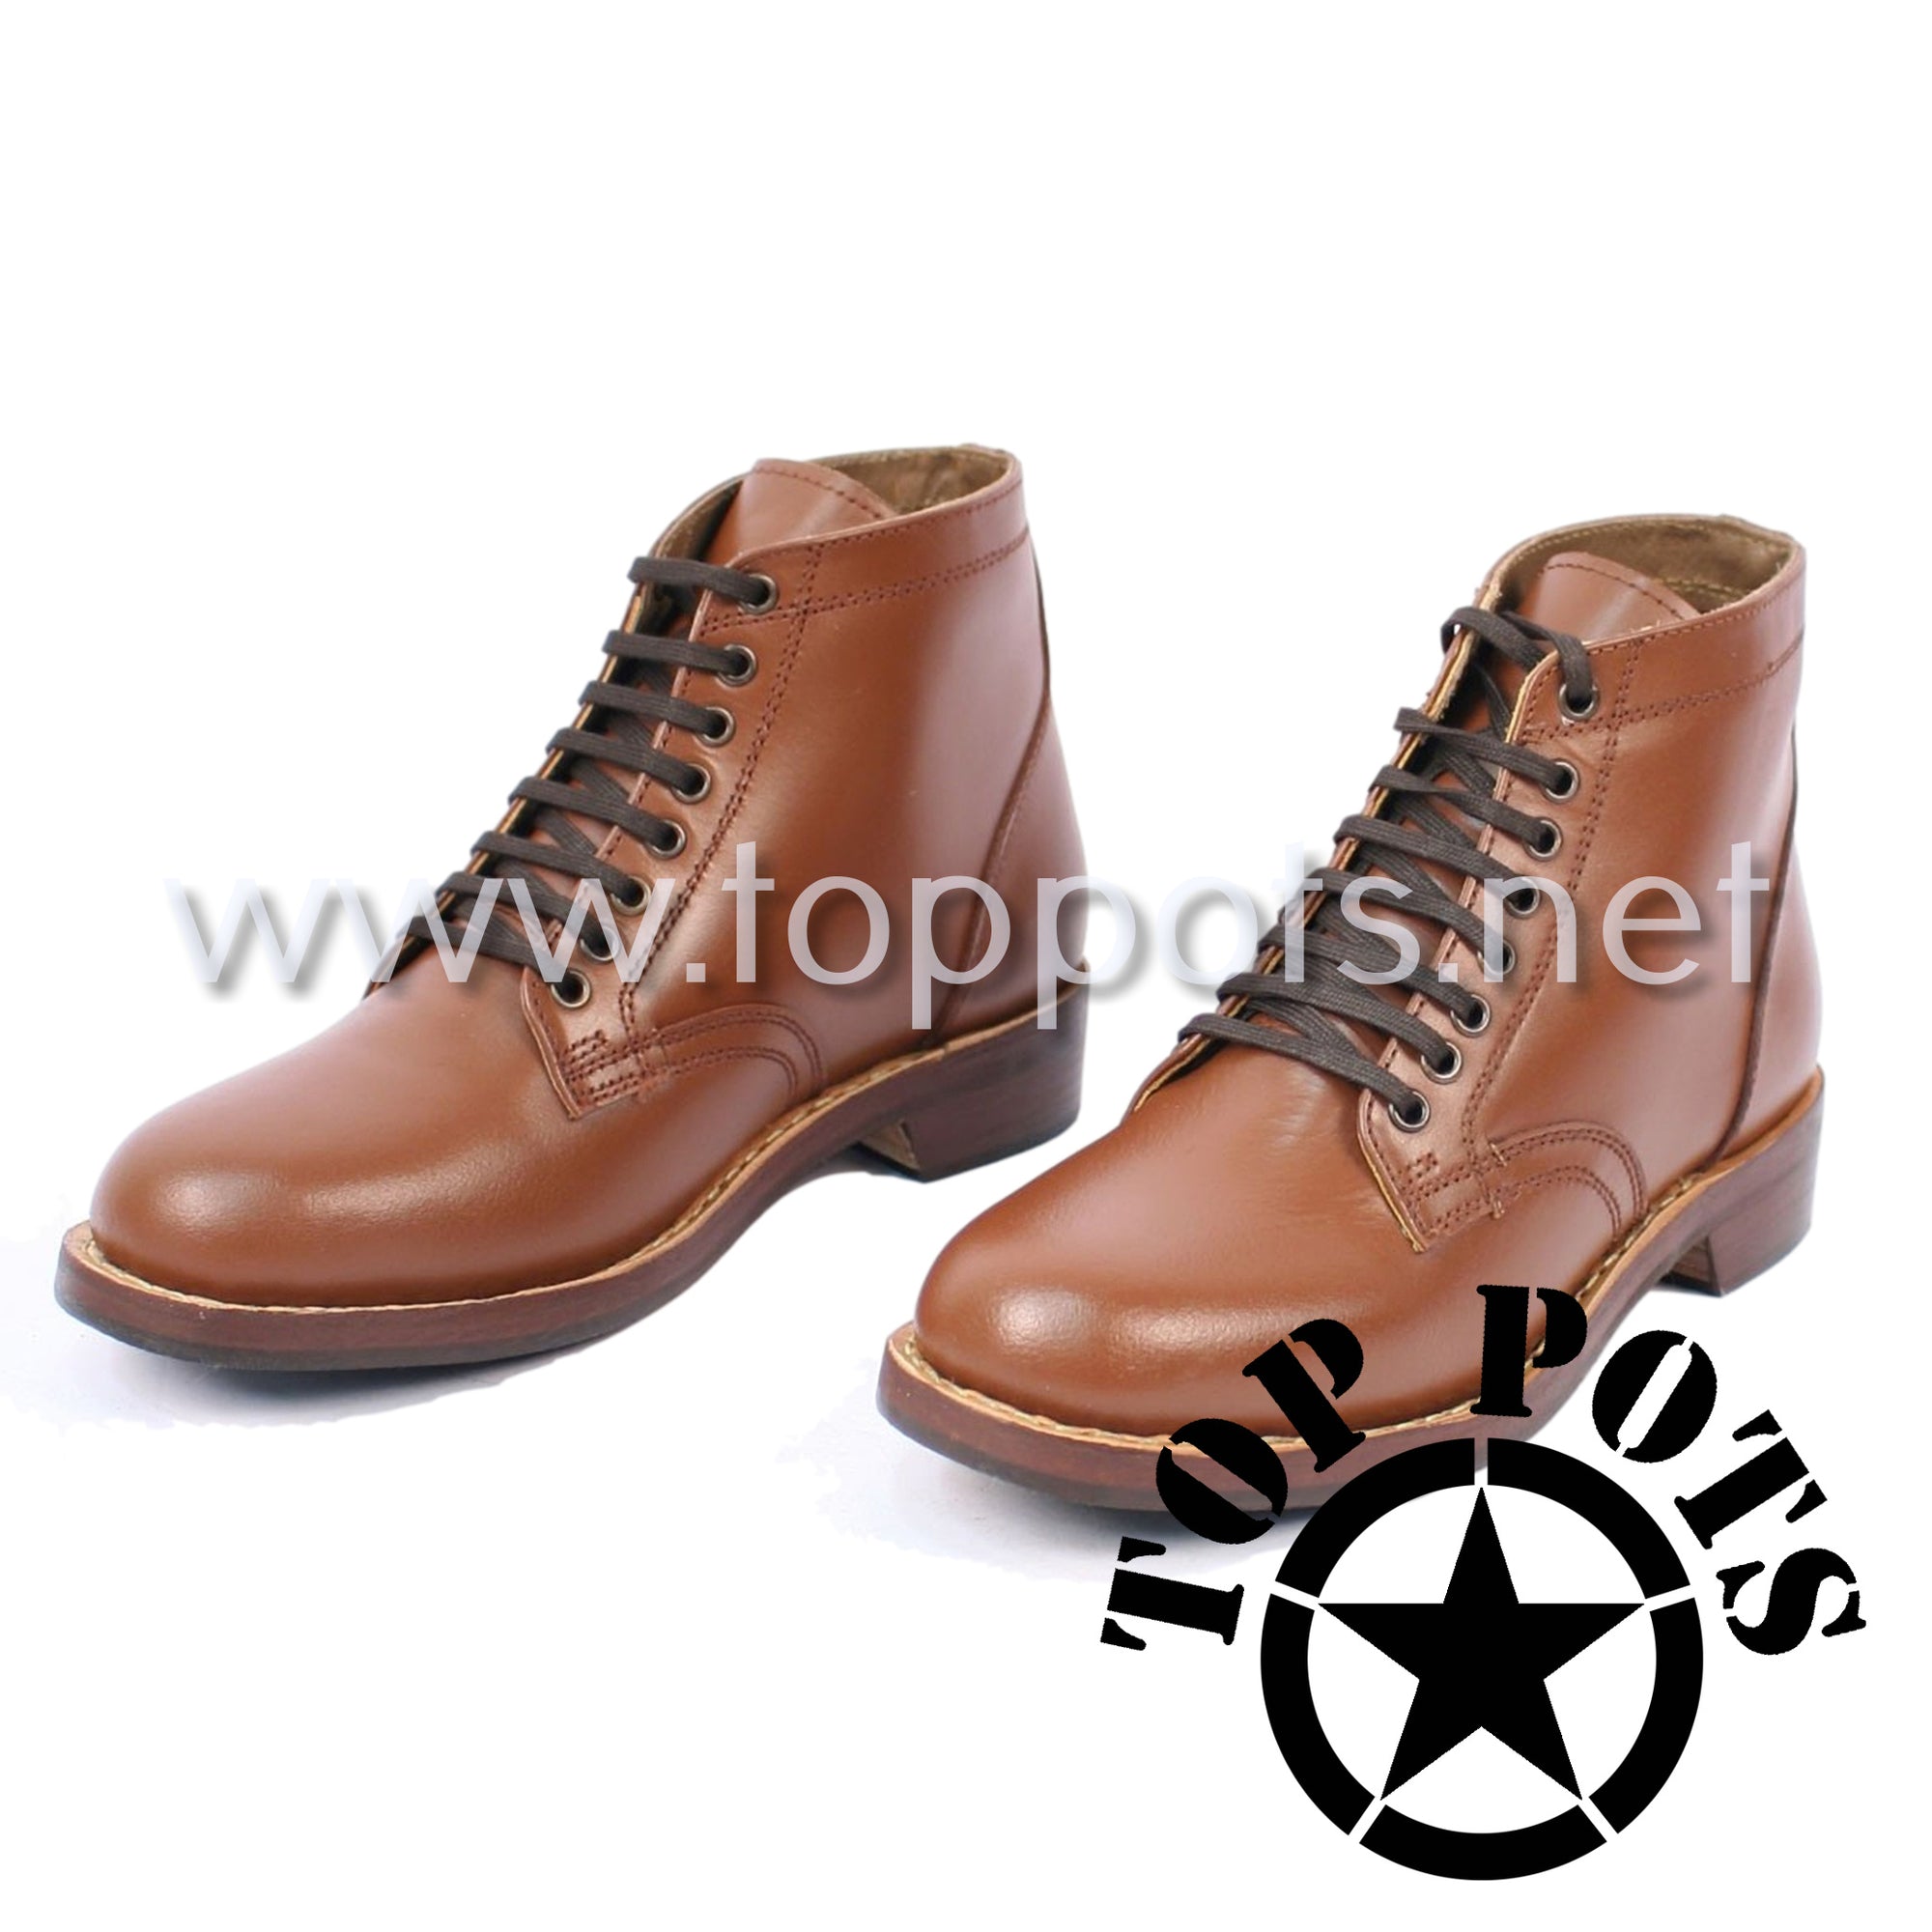 WWII US Army Reproduction M1943 Leather WAC Officer and Enlisted Uniform Russet Brown Service Field Boots – High Ankle Cut